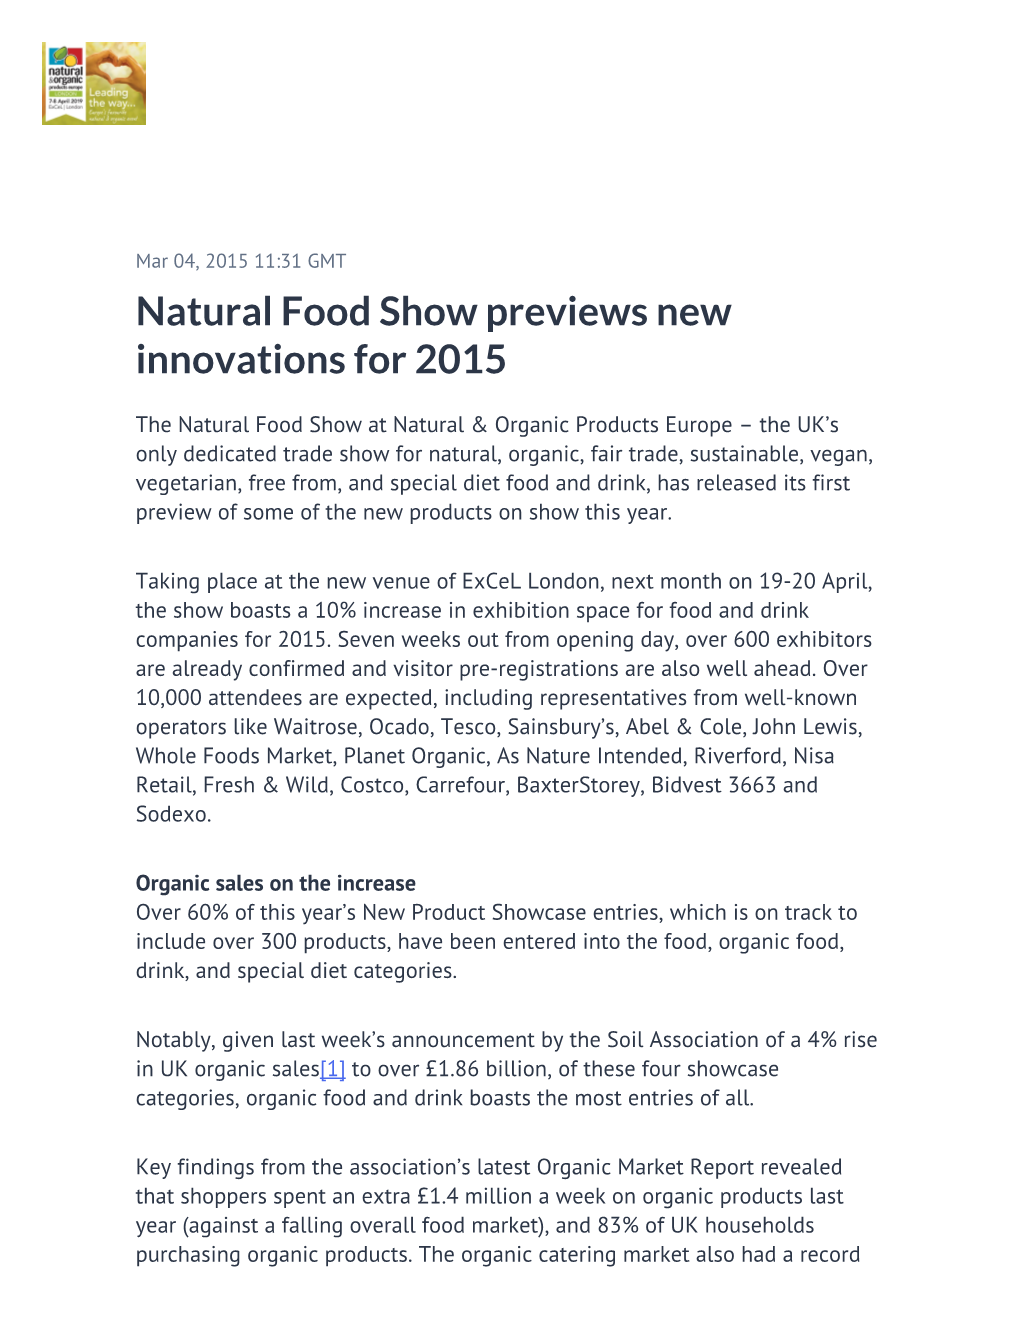 Natural Food Show Previews New Innovations for 2015